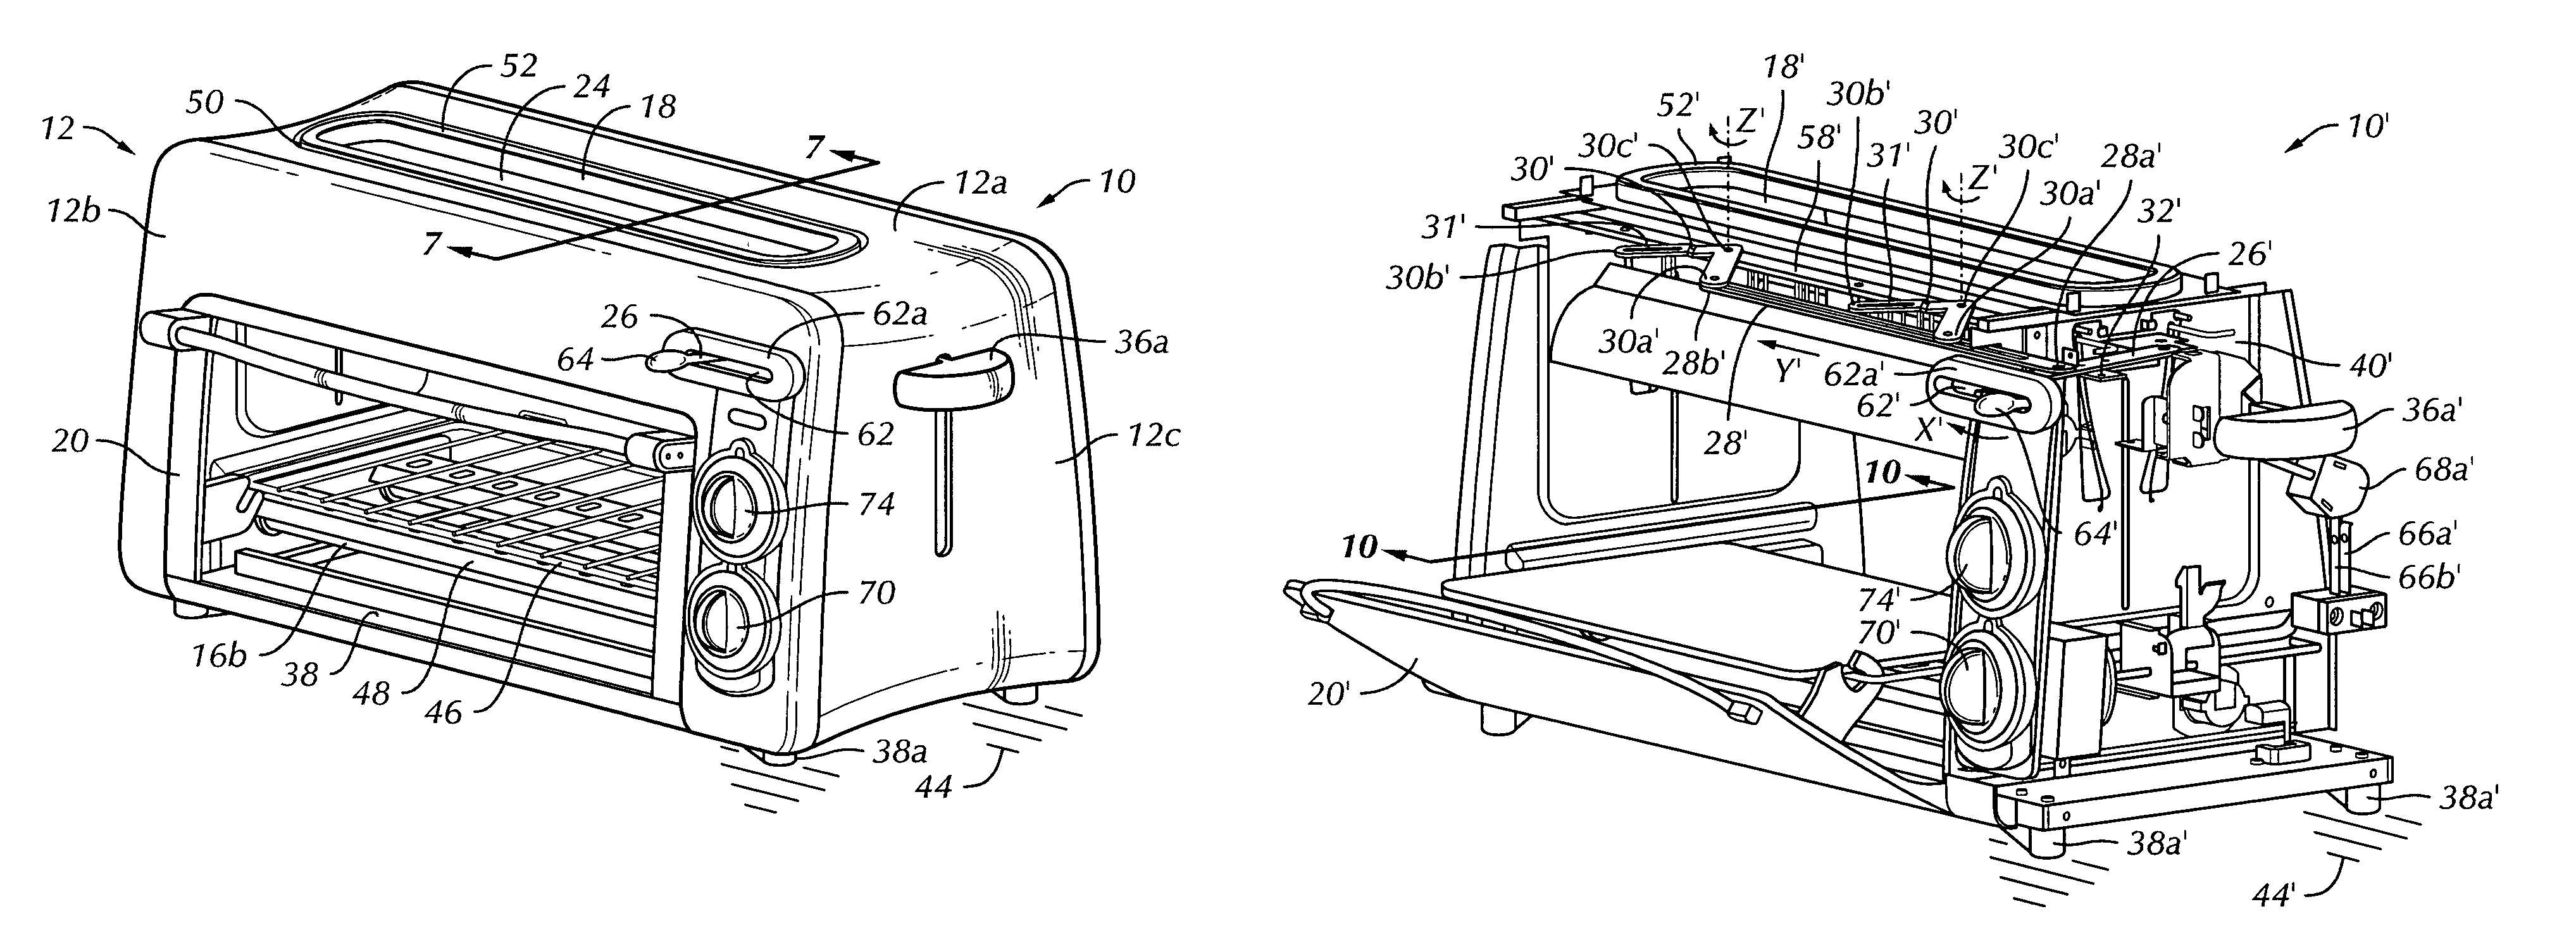 Combination toaster oven and toaster appliance